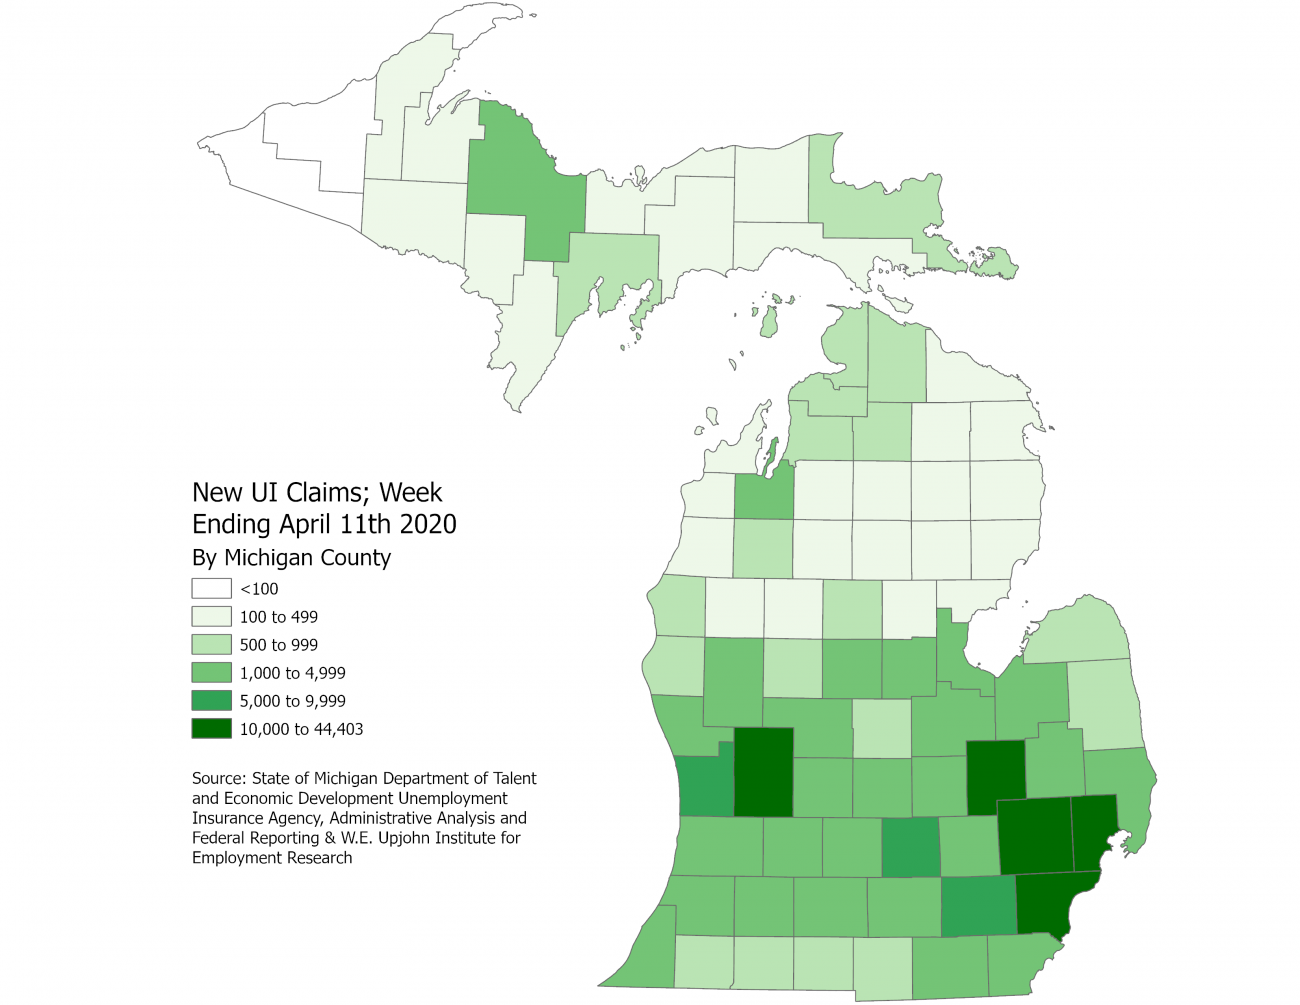 Michigan county initial claims map